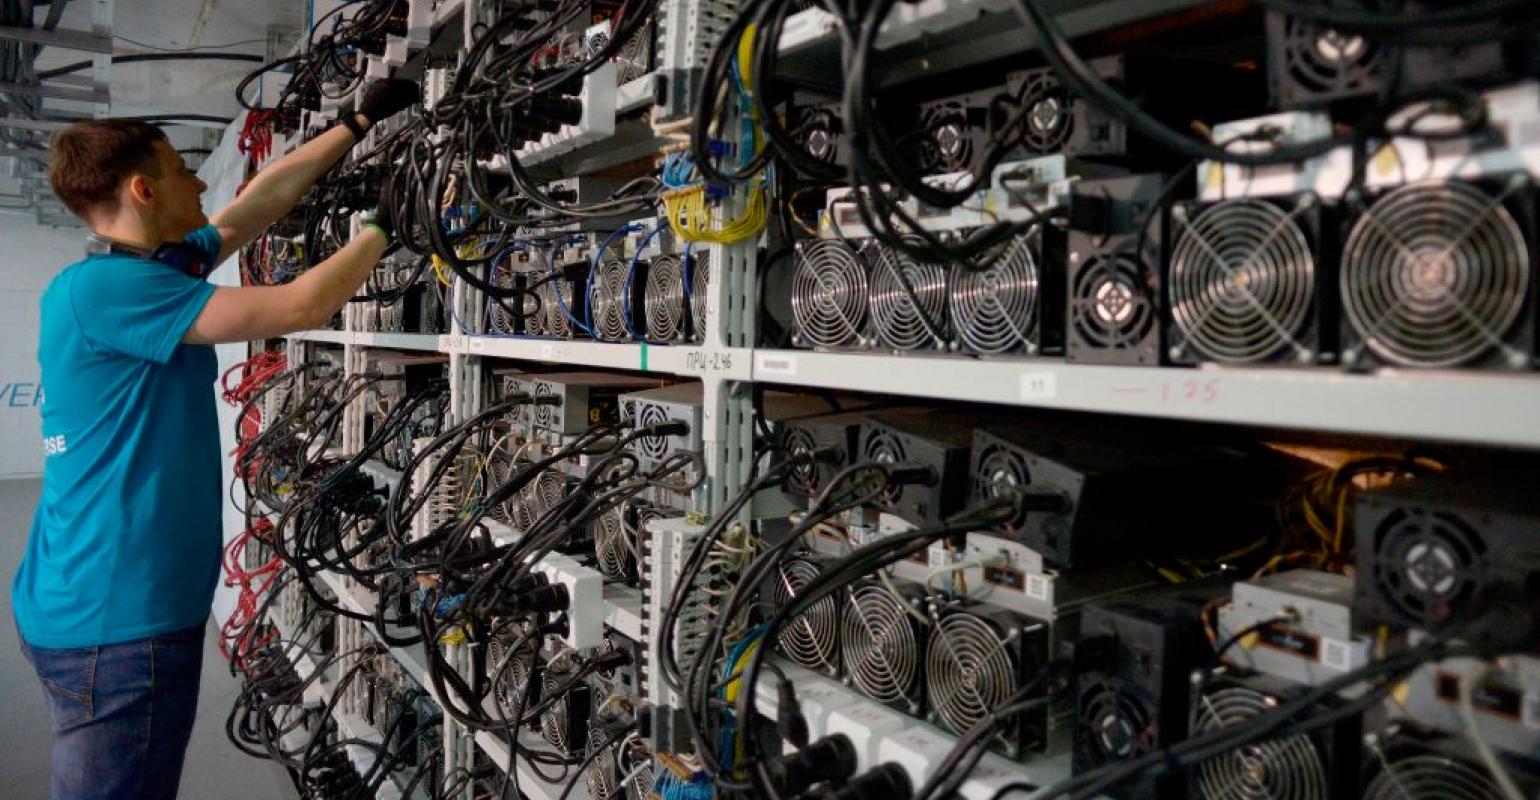 Bitcoin Miners Thwarted by Data Center Crunch | Data Center Knowledge |  News and analysis for the data center industry